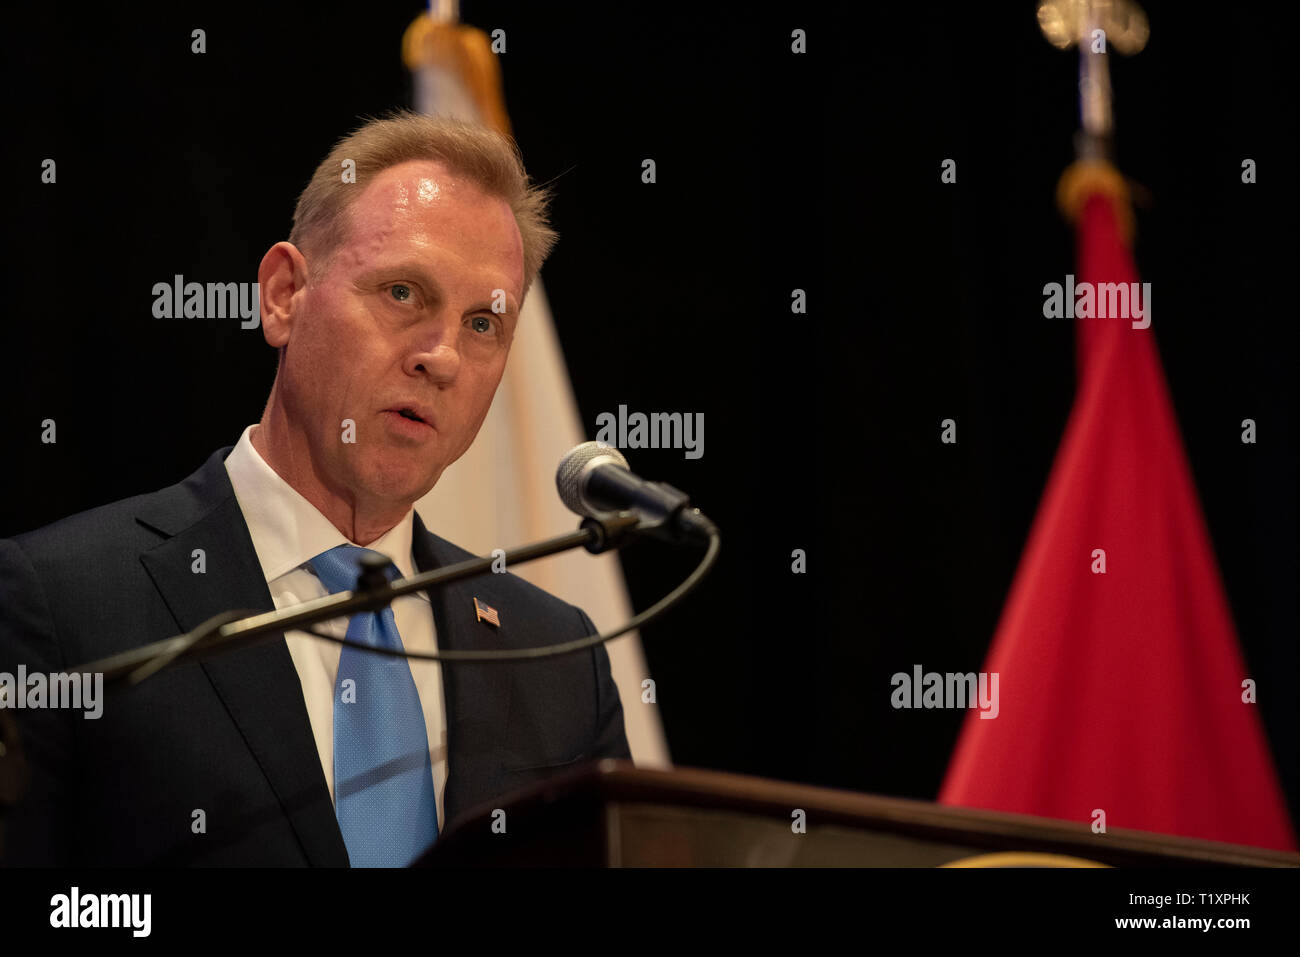 U.S. Acting Secretary of Defense Patrick M. Shanahan attends the U.S. Central Command change of command, Tampa, Florida, March 28, 2019. U.S. Army Gen. Joseph L. Votel, who retired after 39 years of military service, was succeeded as Centcom commander by U.S. Marine Corps Gen. Kenneth F. McKenzie Jr. (DoD photo by Lisa Ferdinando) Stock Photo